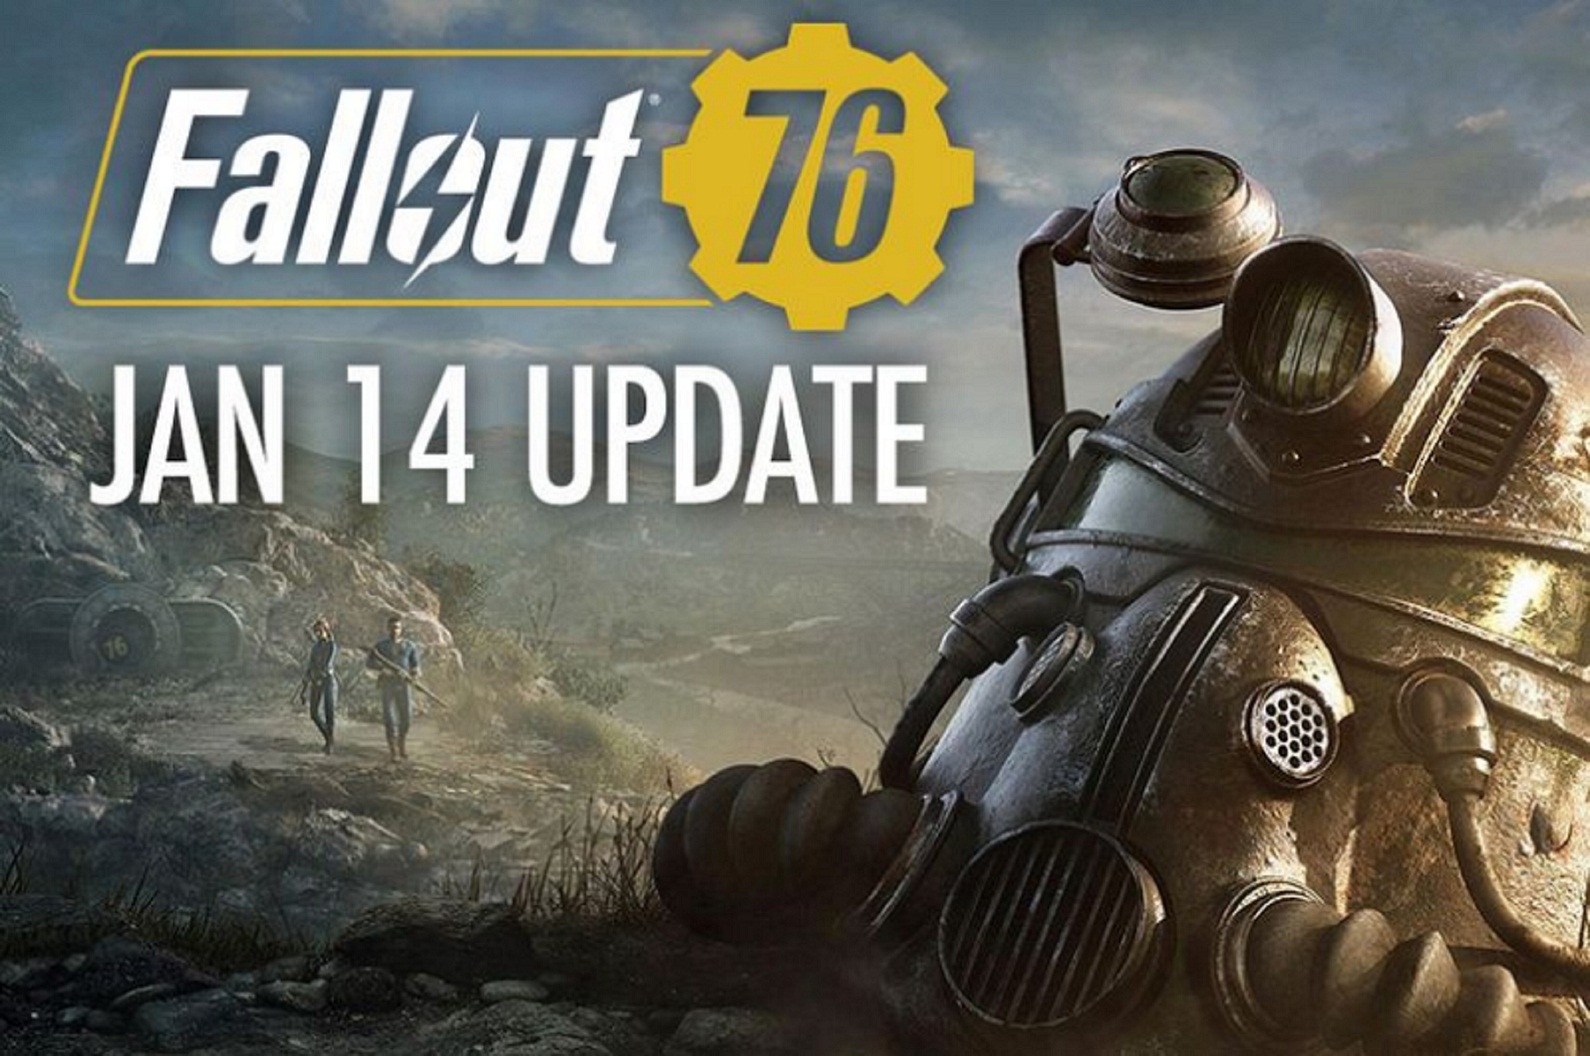 Update: Fallout 76 Patch Notes 1.33 Dropped Yesterday, January 14 For Xbox One, PC And PlayStation 4